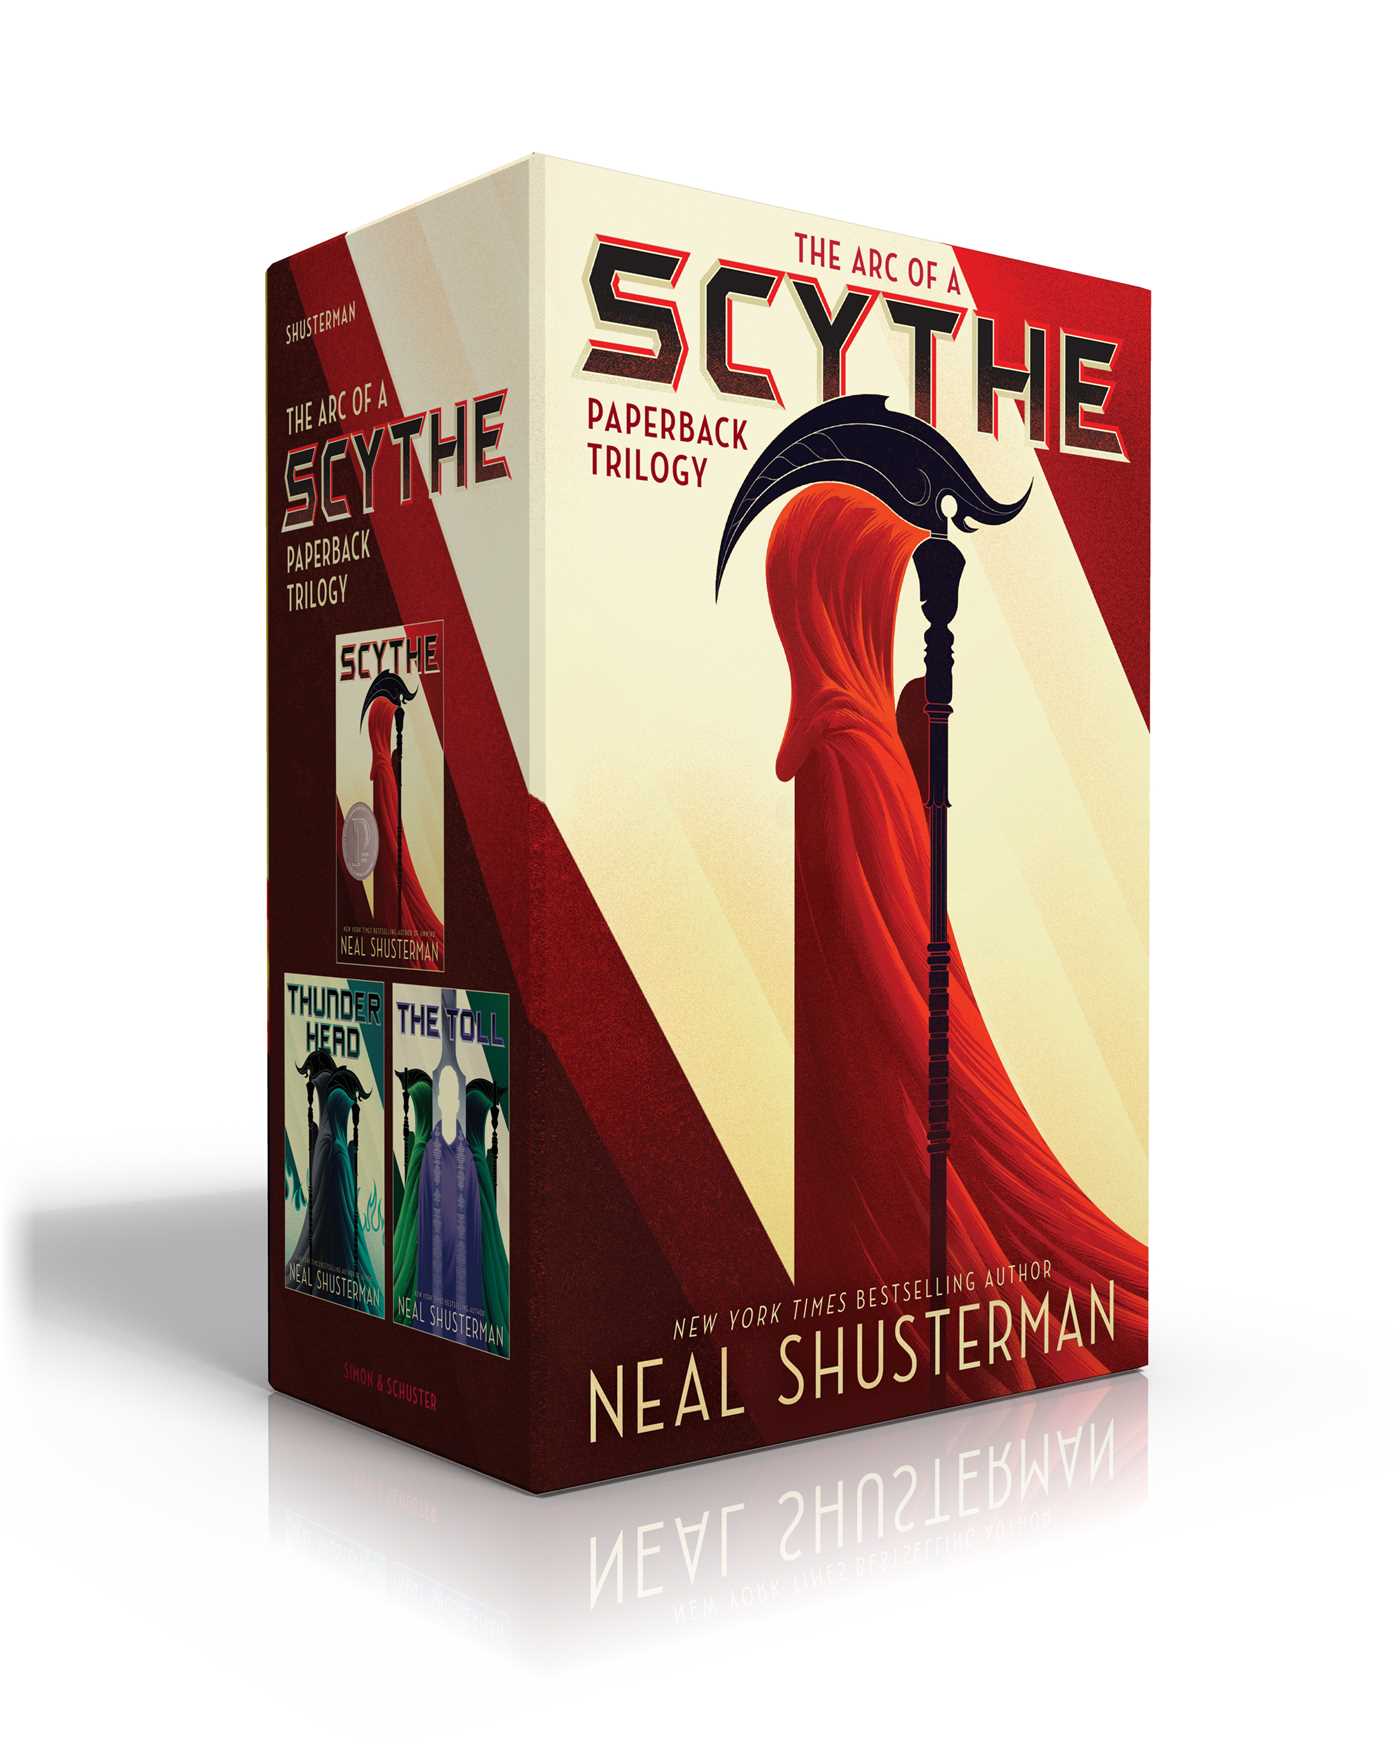 The Arc of a Scythe Paperback Trilogy (Boxed Set)